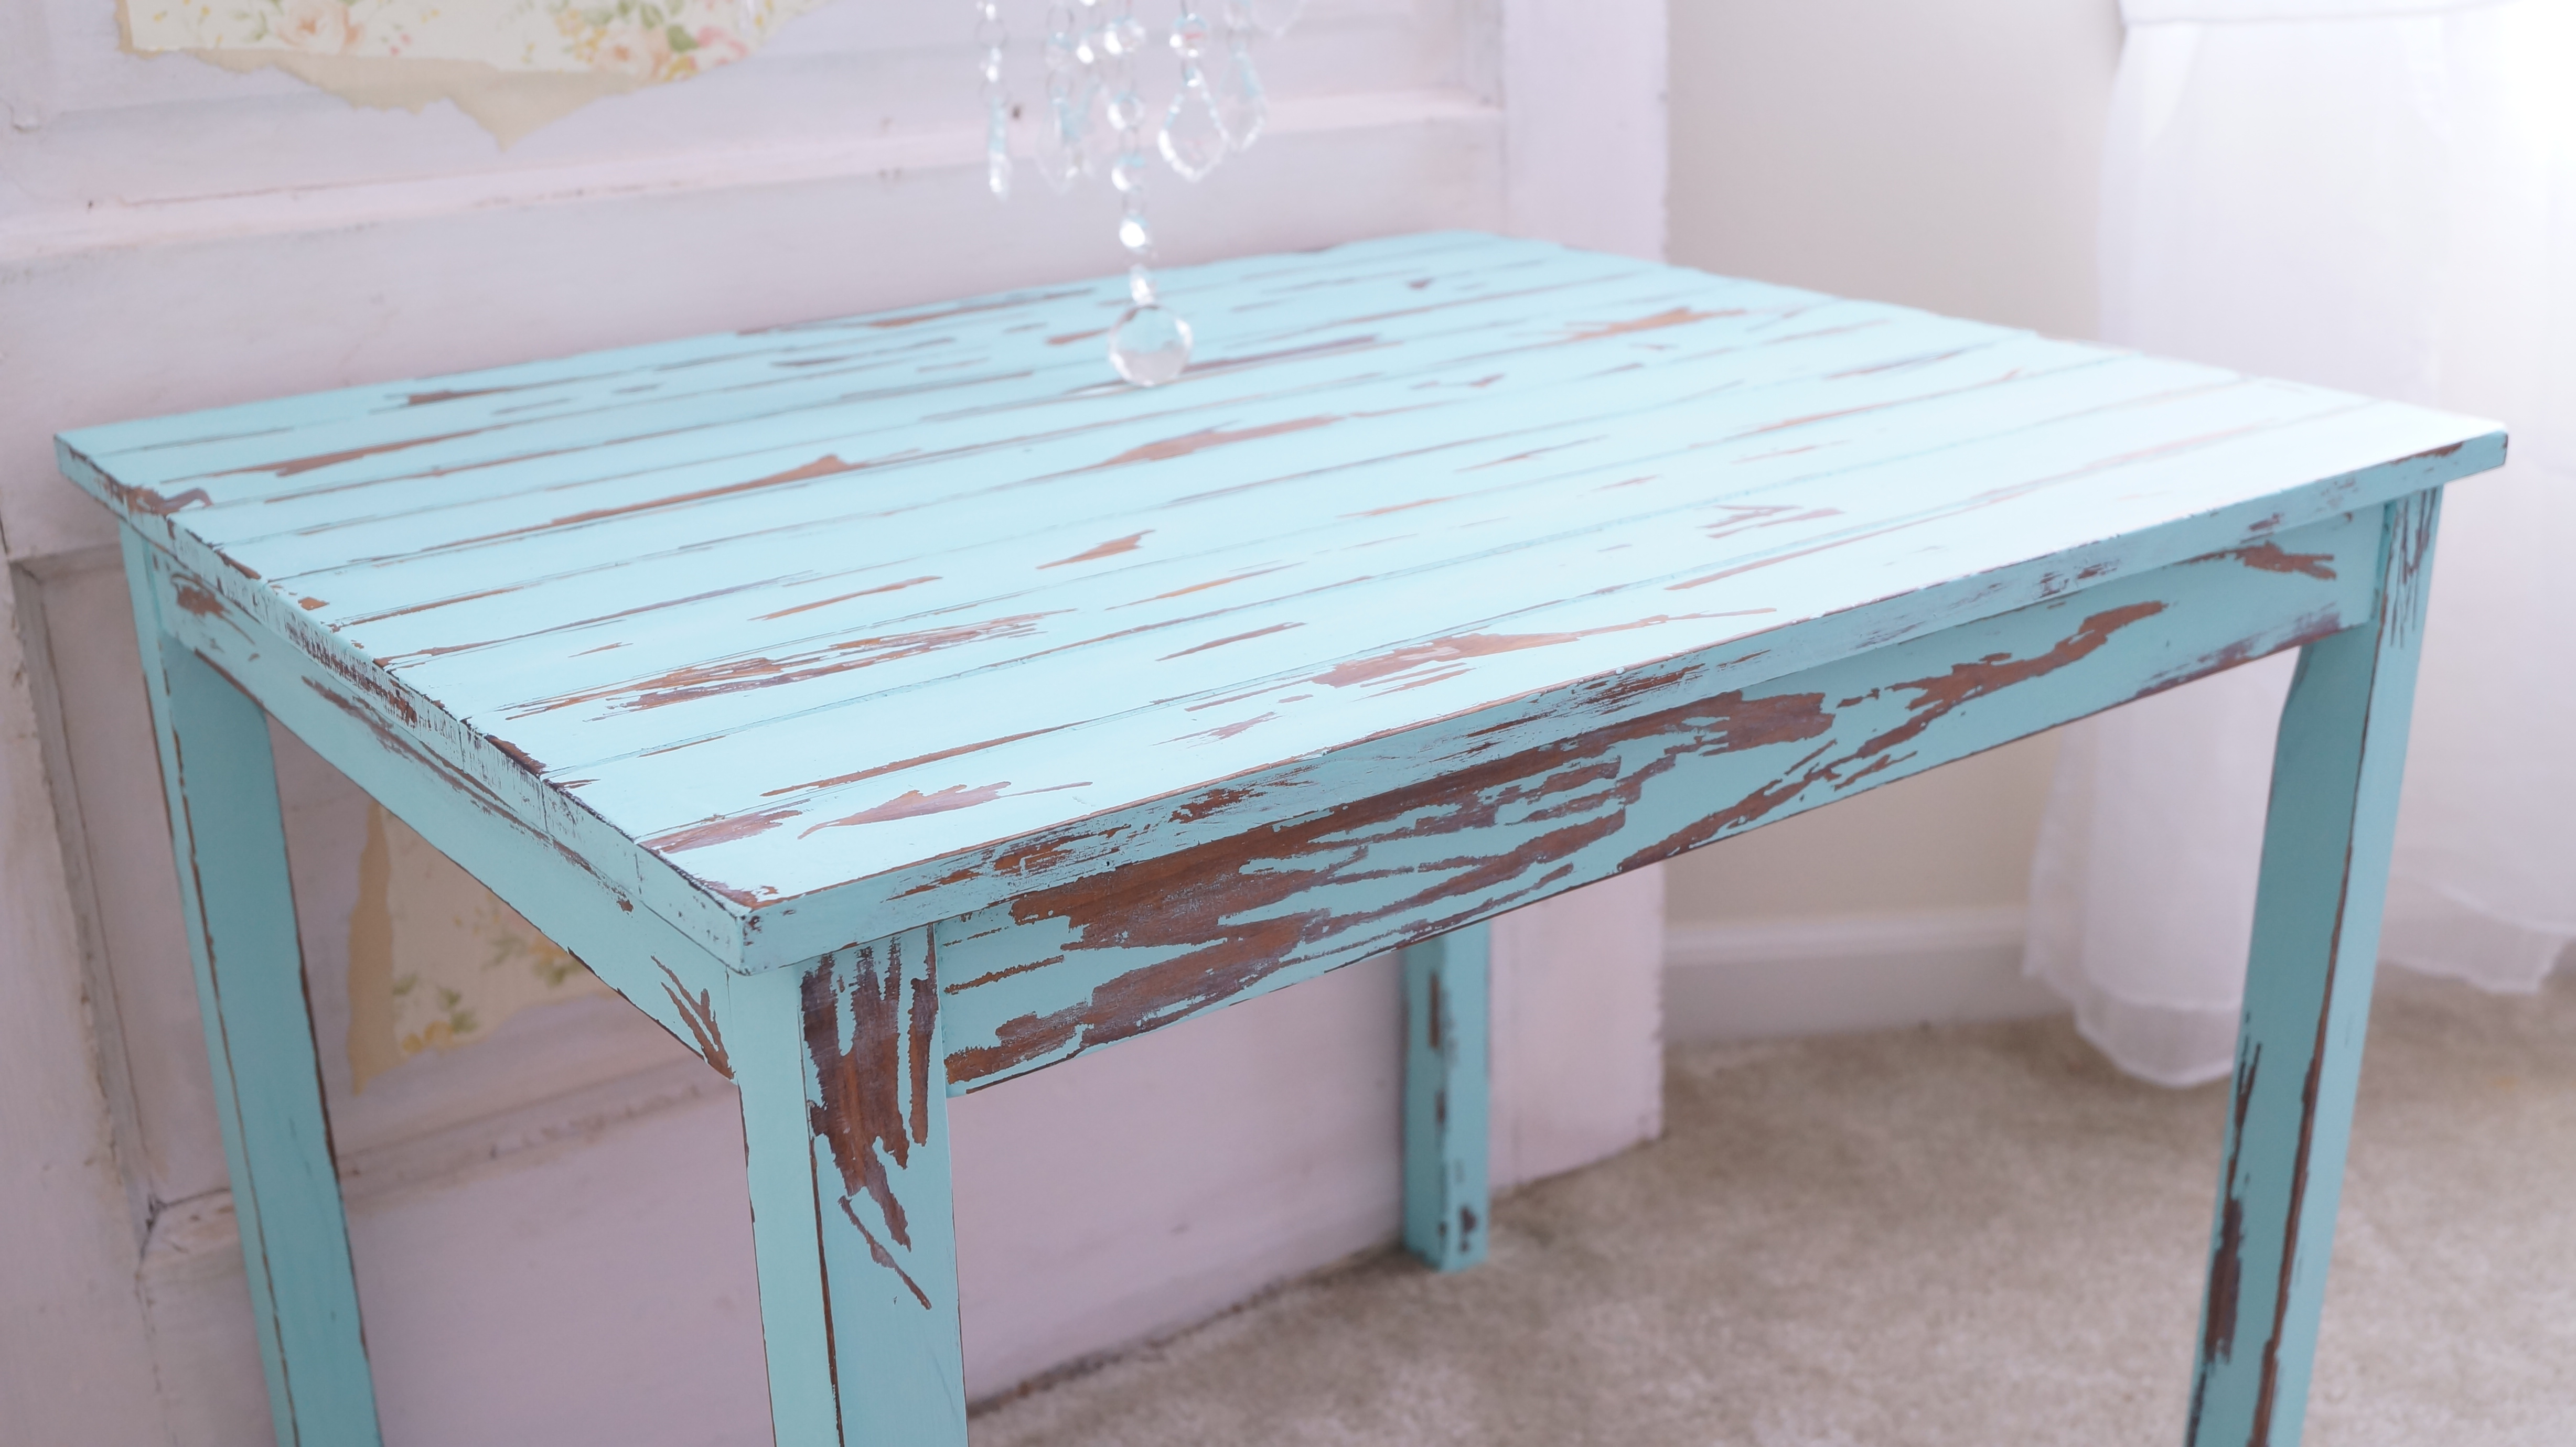 Distress Furniture With Vinegar Tutorial Anne P Makeup And More